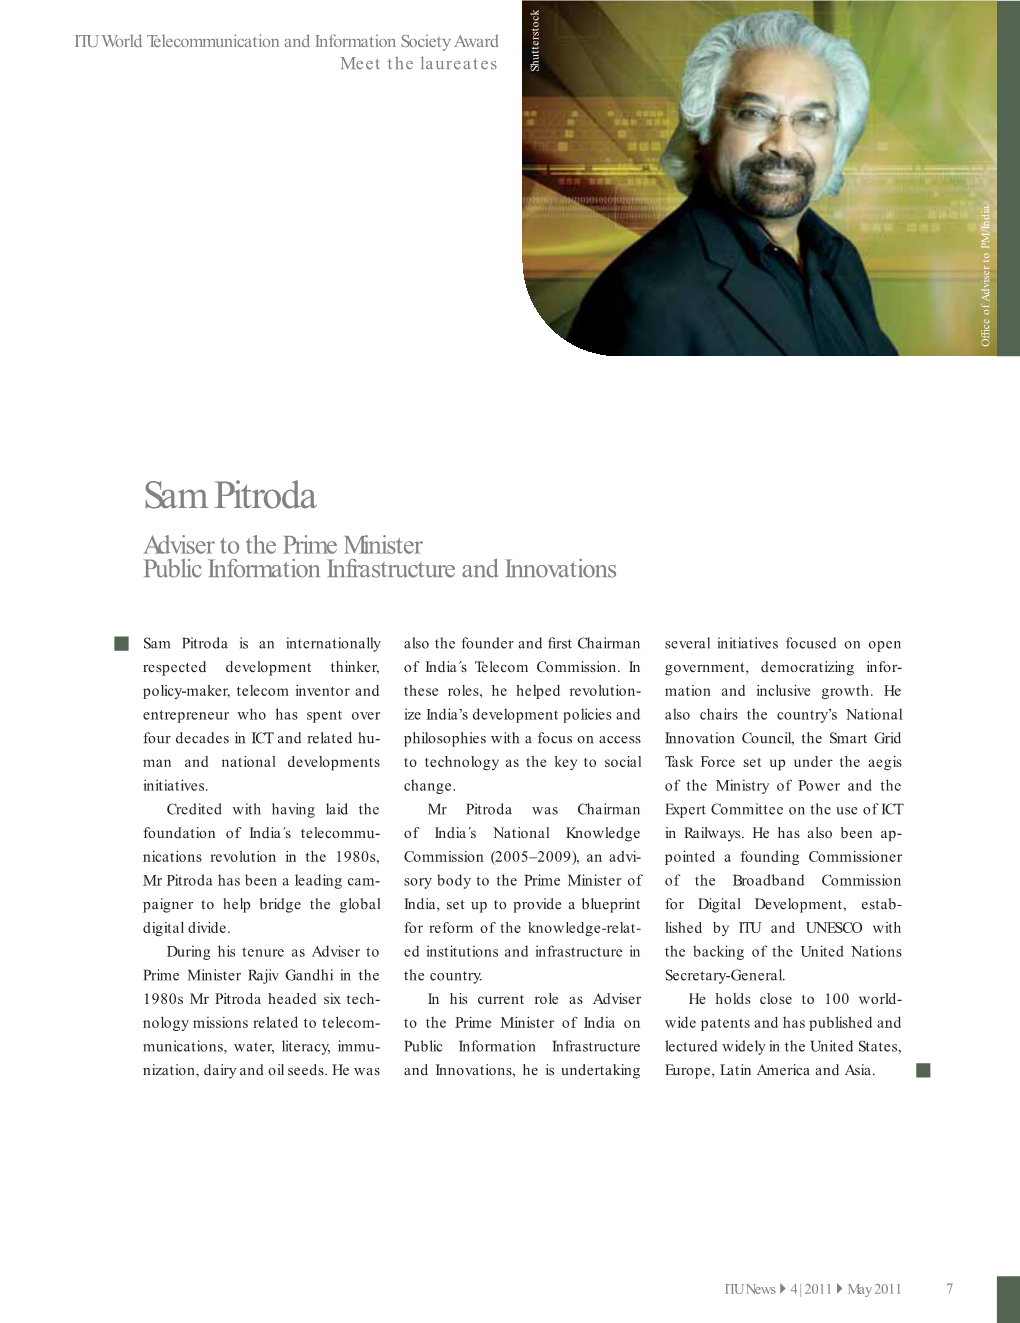 Sam Pitroda Adviser to the Prime Minister Public Information Infrastructure and Innovations